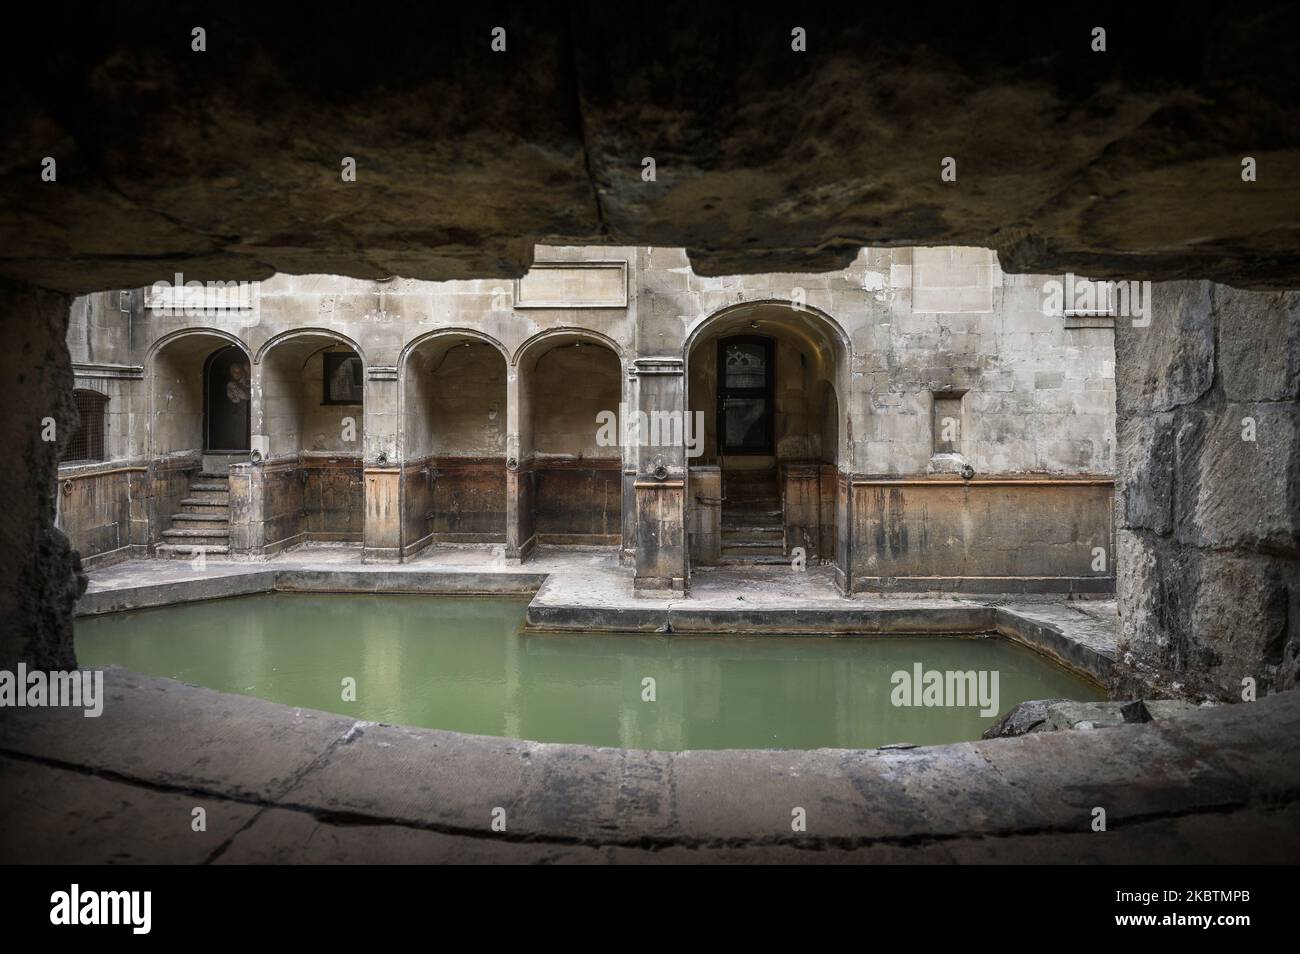 Images from the city of Bath, Somerset, England, United Kingdom. Roman Baths. Picture by Paul Heyes, Tuesday/Wednesday October 11/12, 2022. Stock Photo